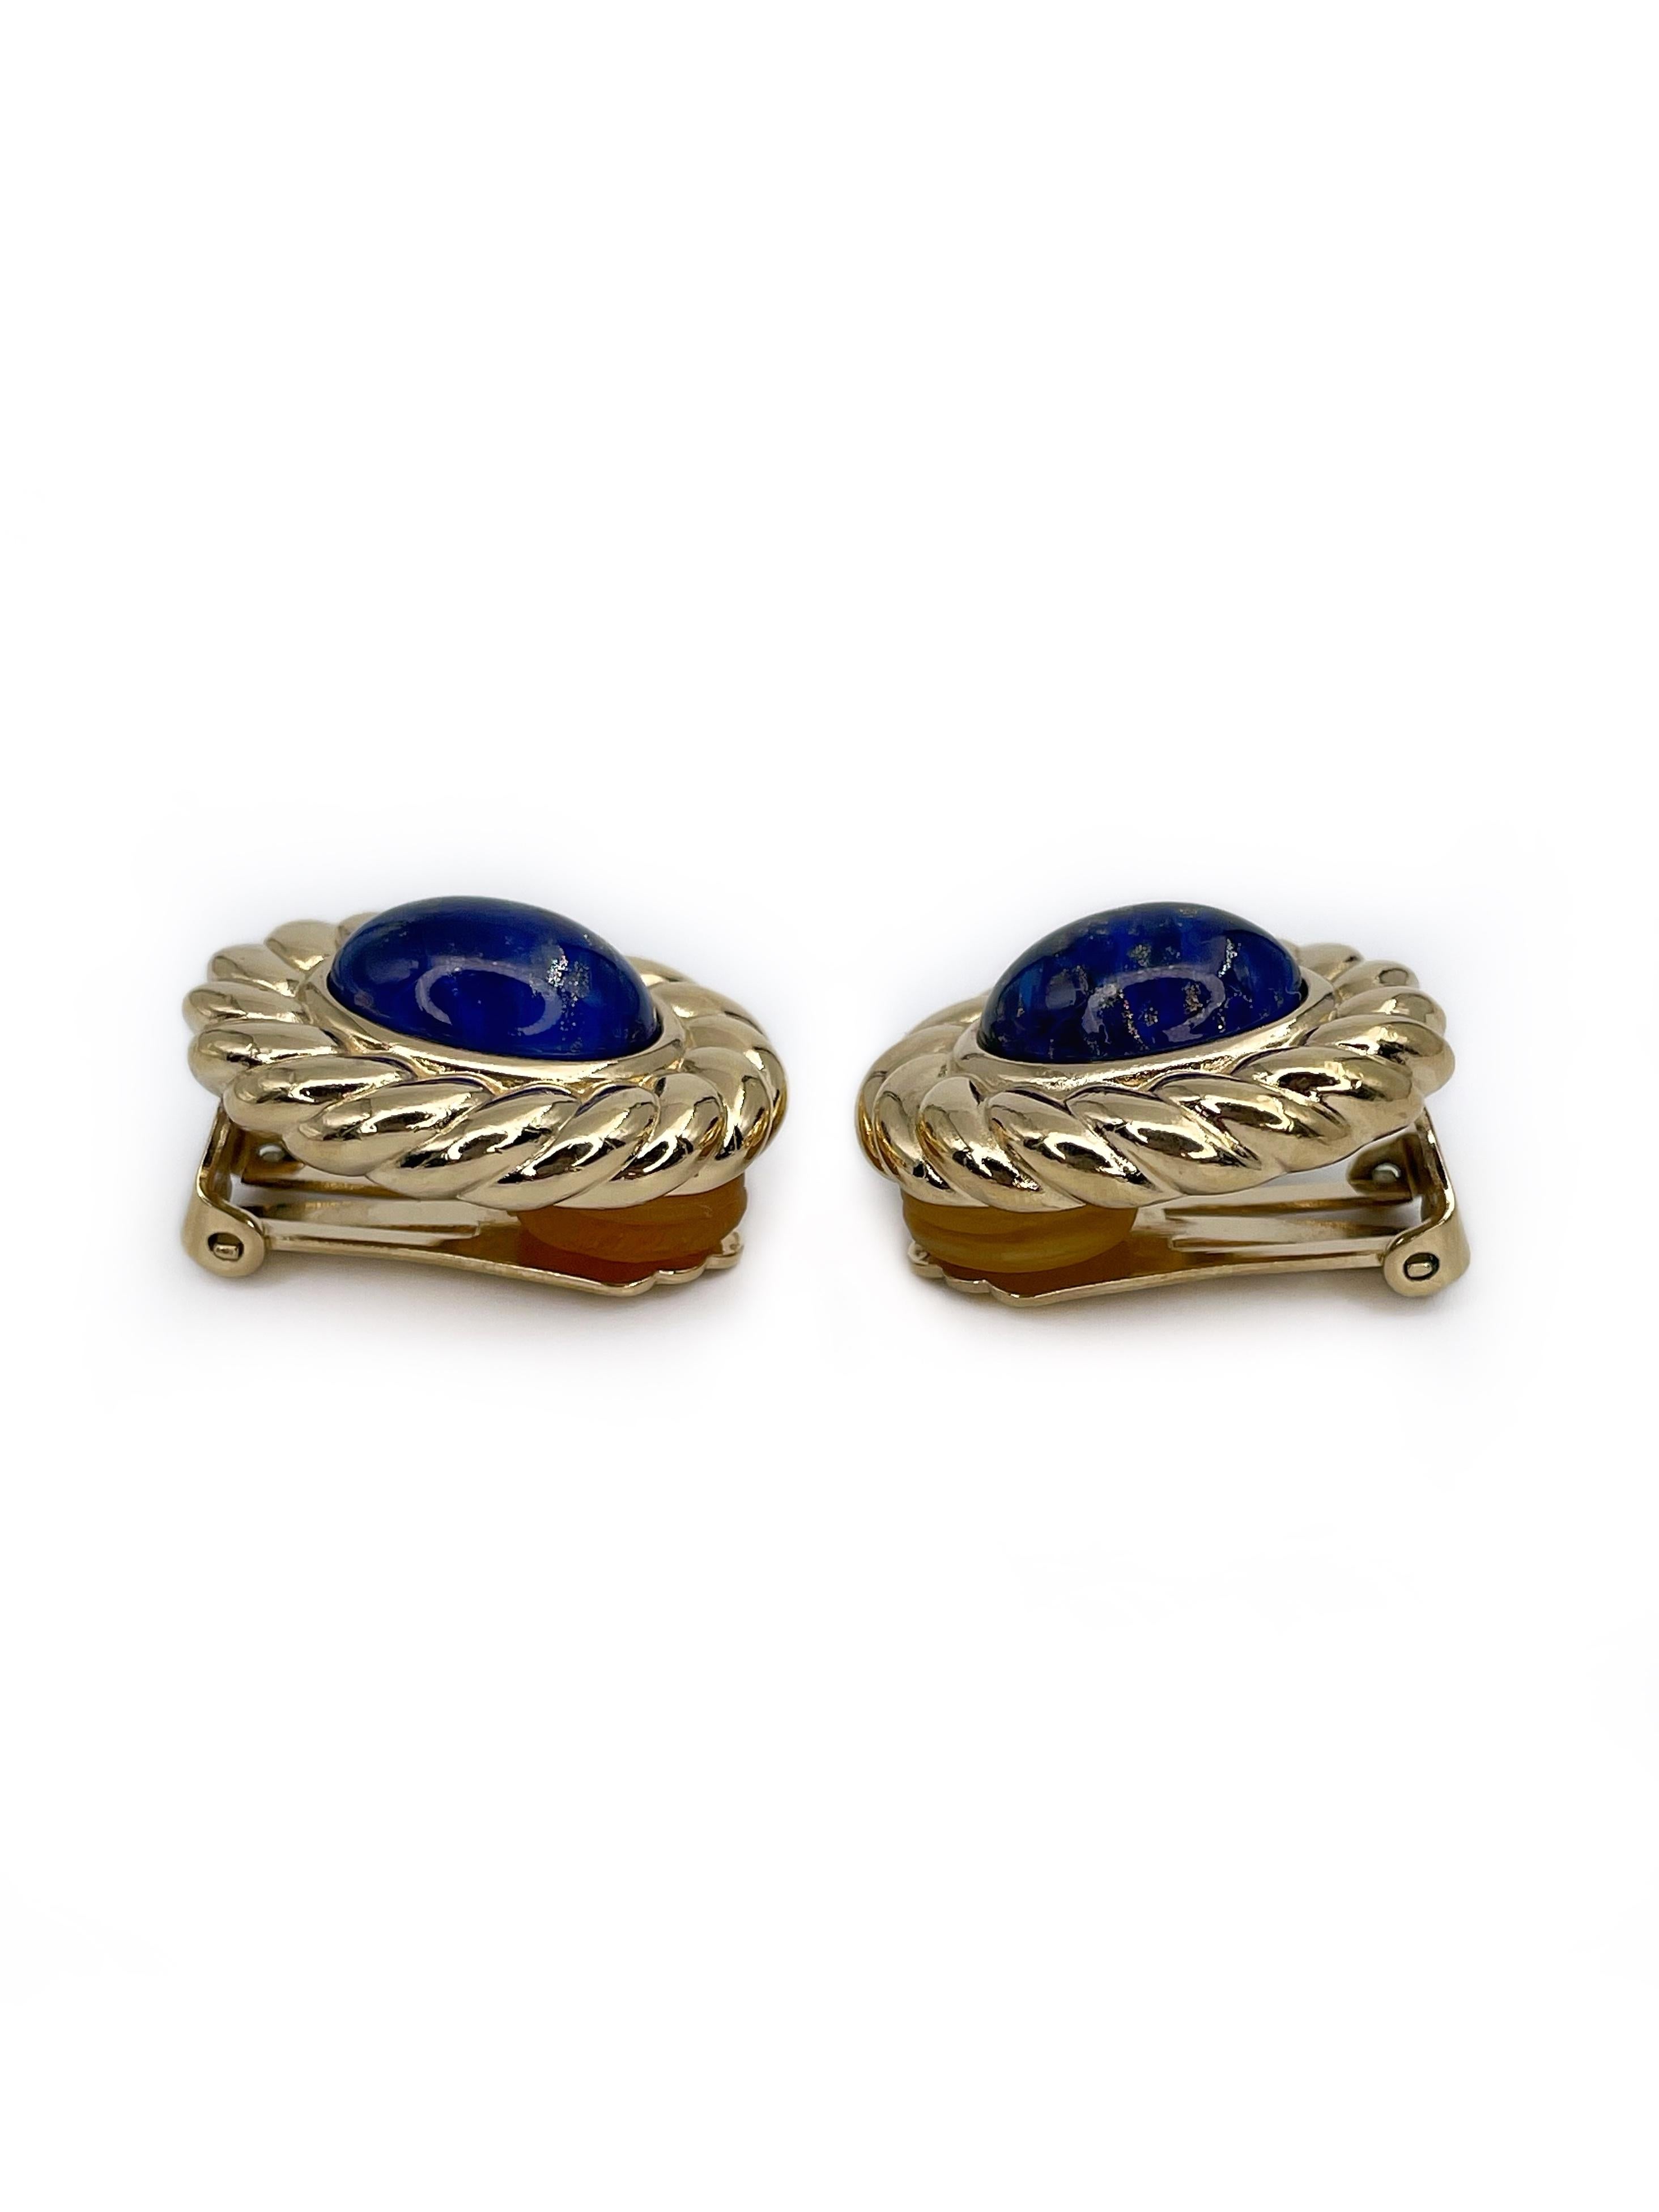 Modern 1980s Vintage Christian Dior Gold Tone Faux Lapis Lazuli Oval Clip on Earrings